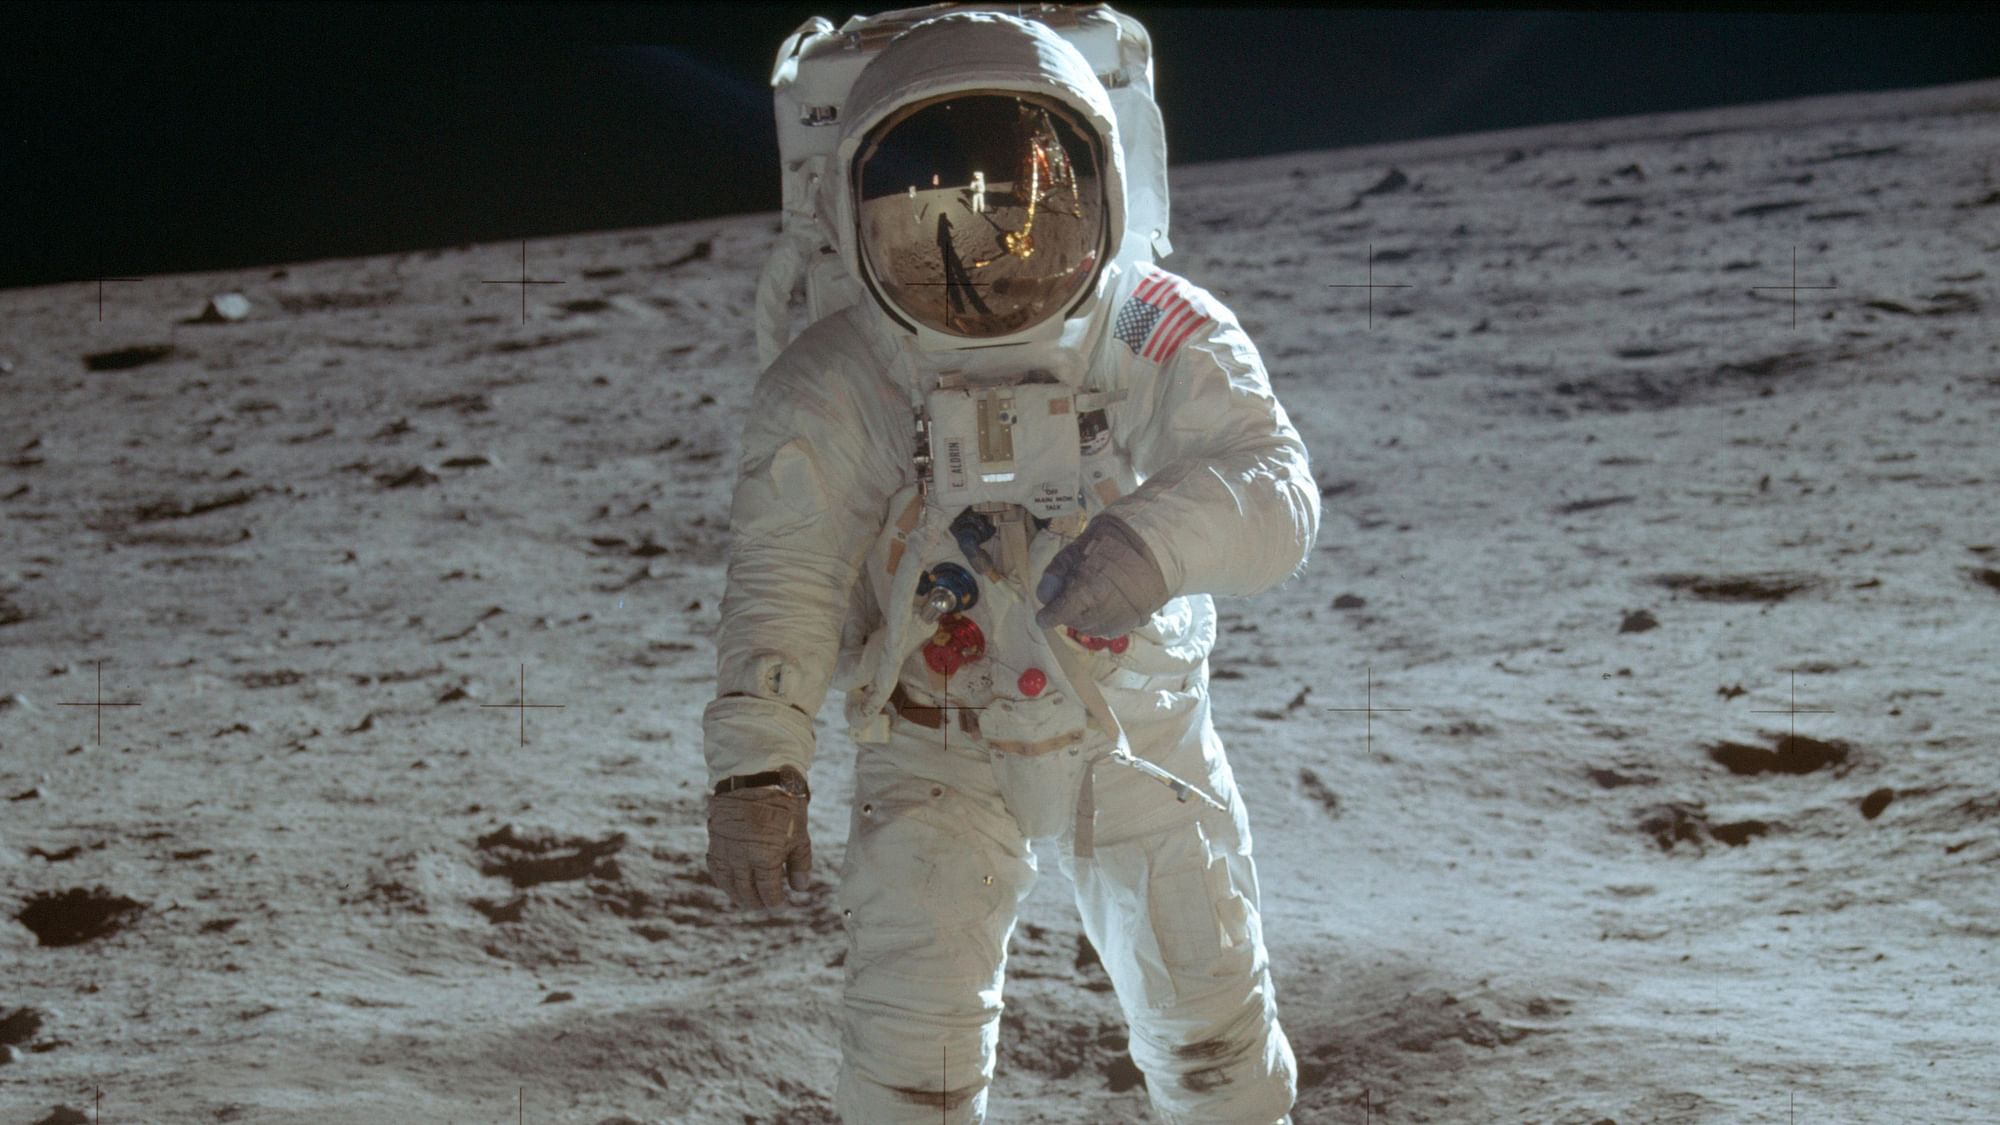 Hundreds of millions tuned in to radios or watched the grainy black-and-white images on TV as Apollo 11’s Neil Armstrong and Buzz Aldrin set foot on the moon on 20 July, 1969, in one of humanity’s most glorious technological achievements.&nbsp;